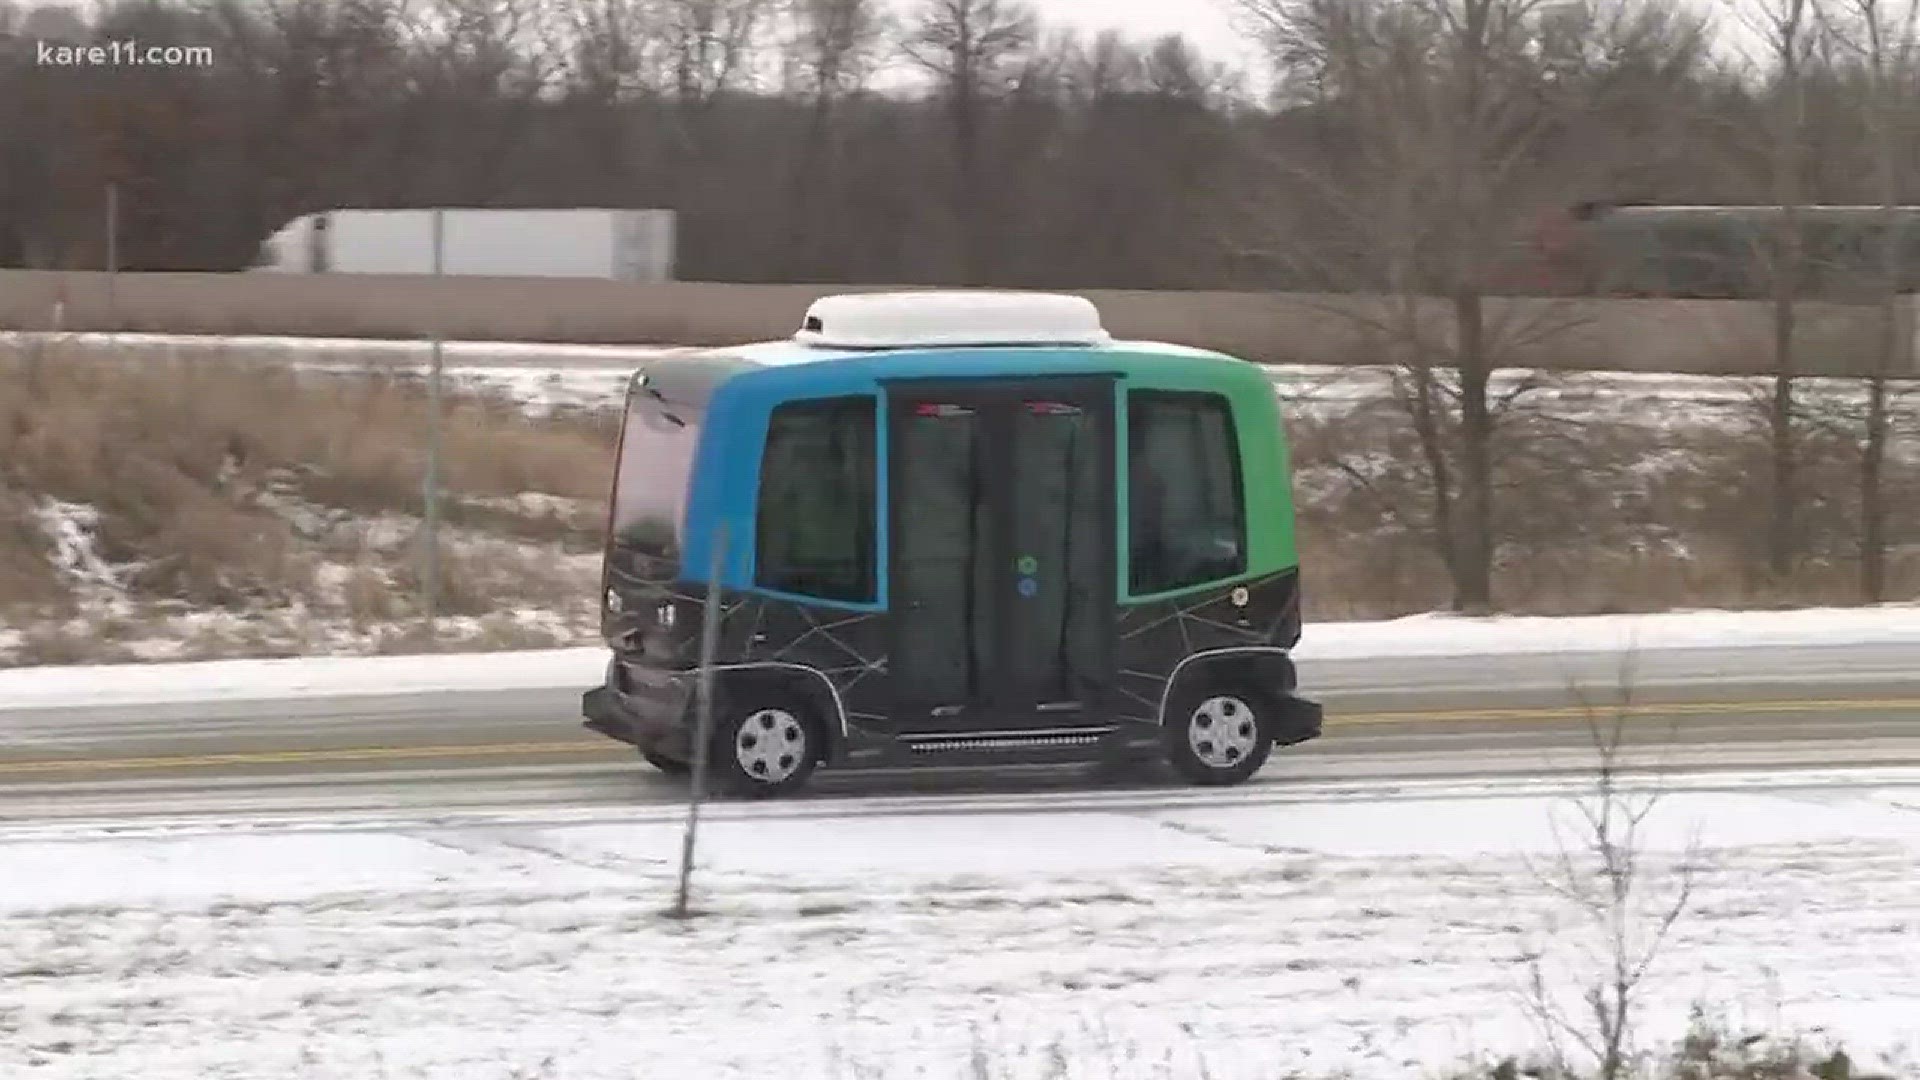 Over the next four months, MnDOT will be testing an autonomous shuttle bus. http://kare11.tv/2yj7gfA